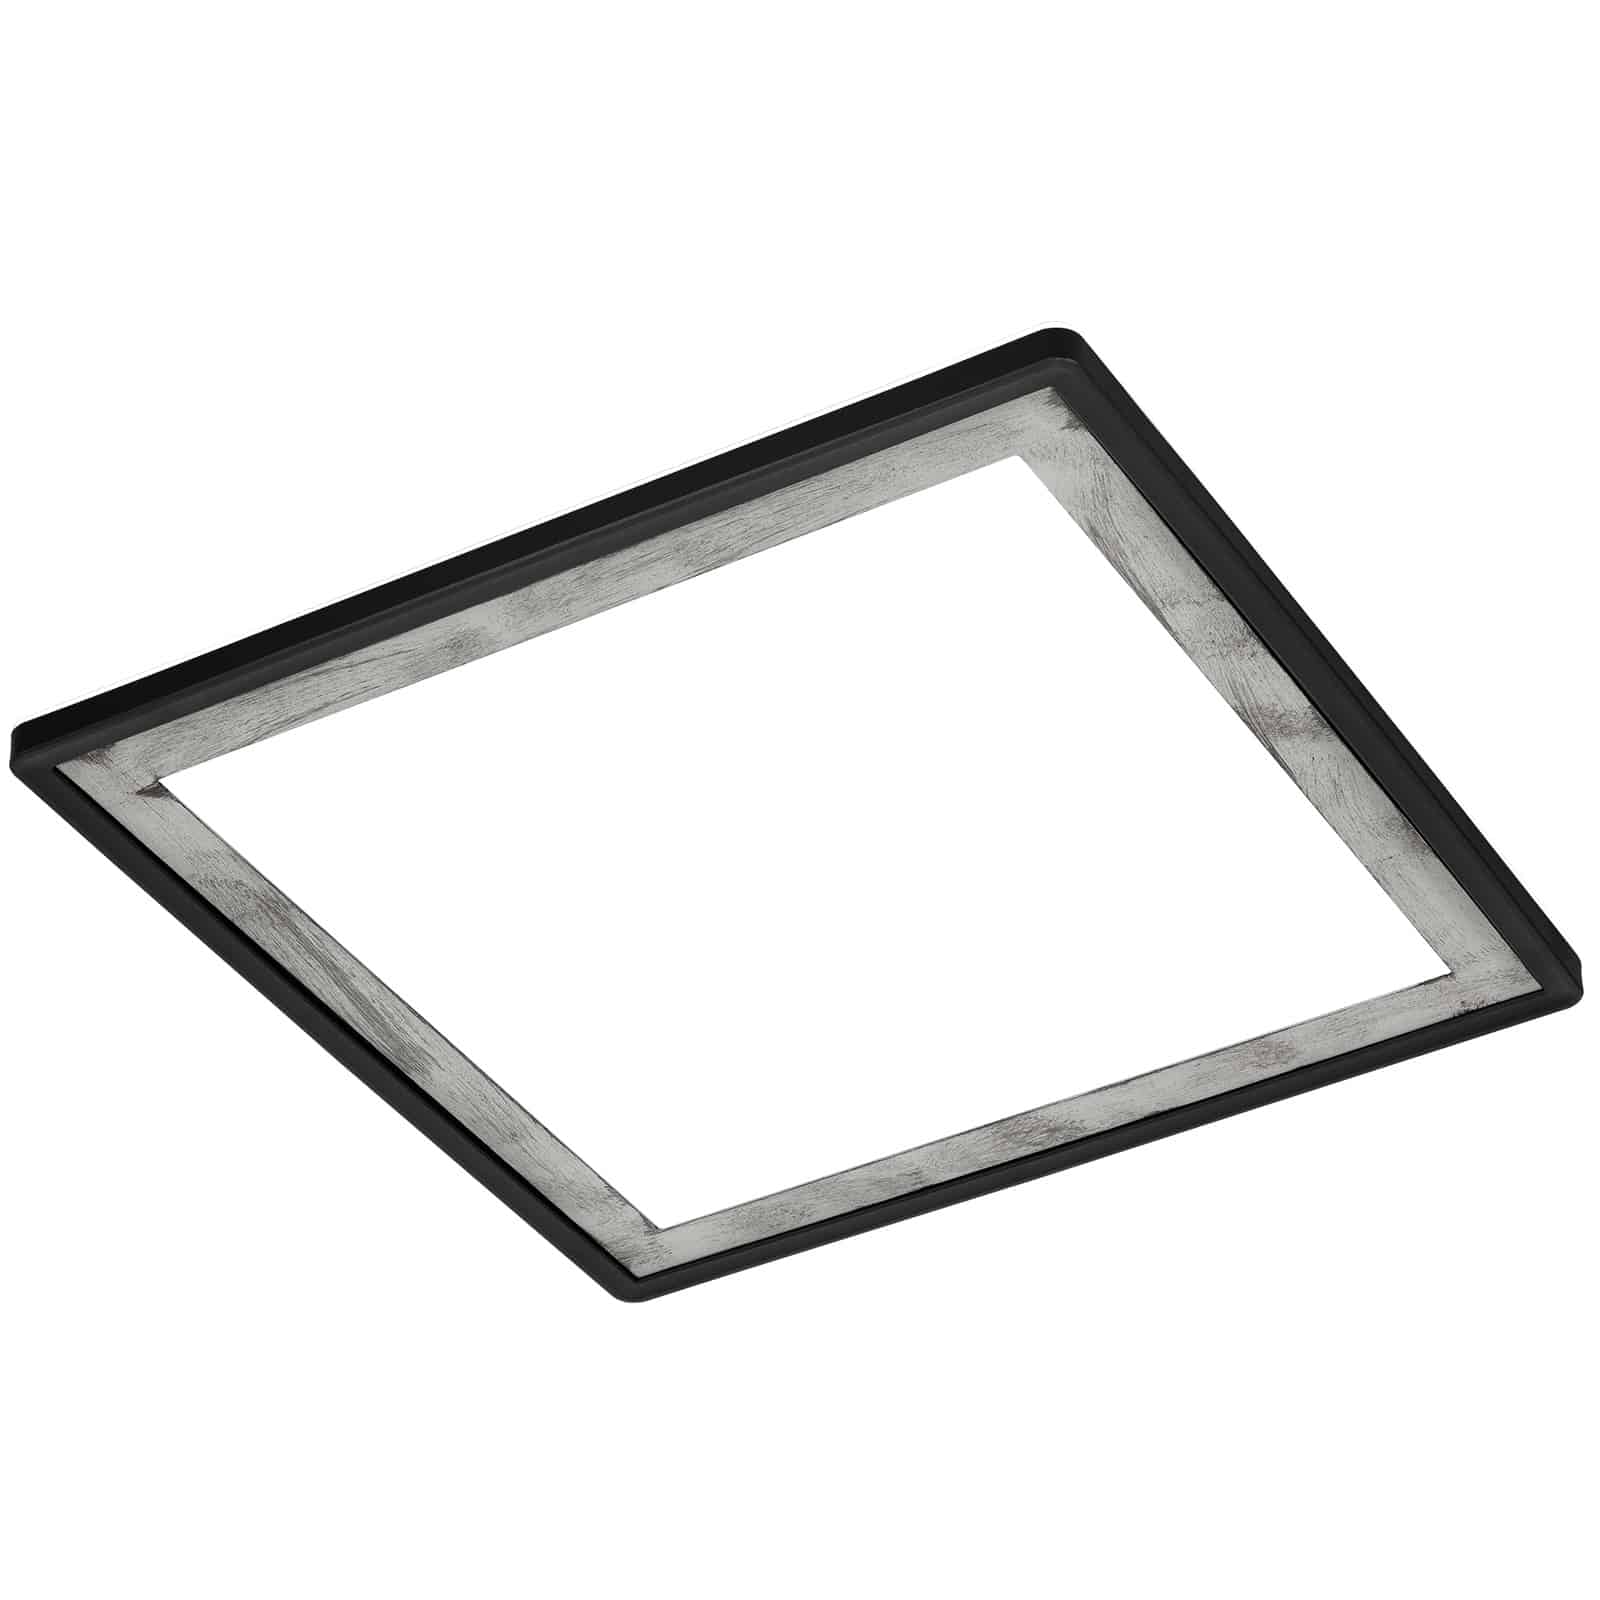 Ultraflaches LED panel with LED backlight, 42 cm, LED, 18 W, 2400 lm, black-silver